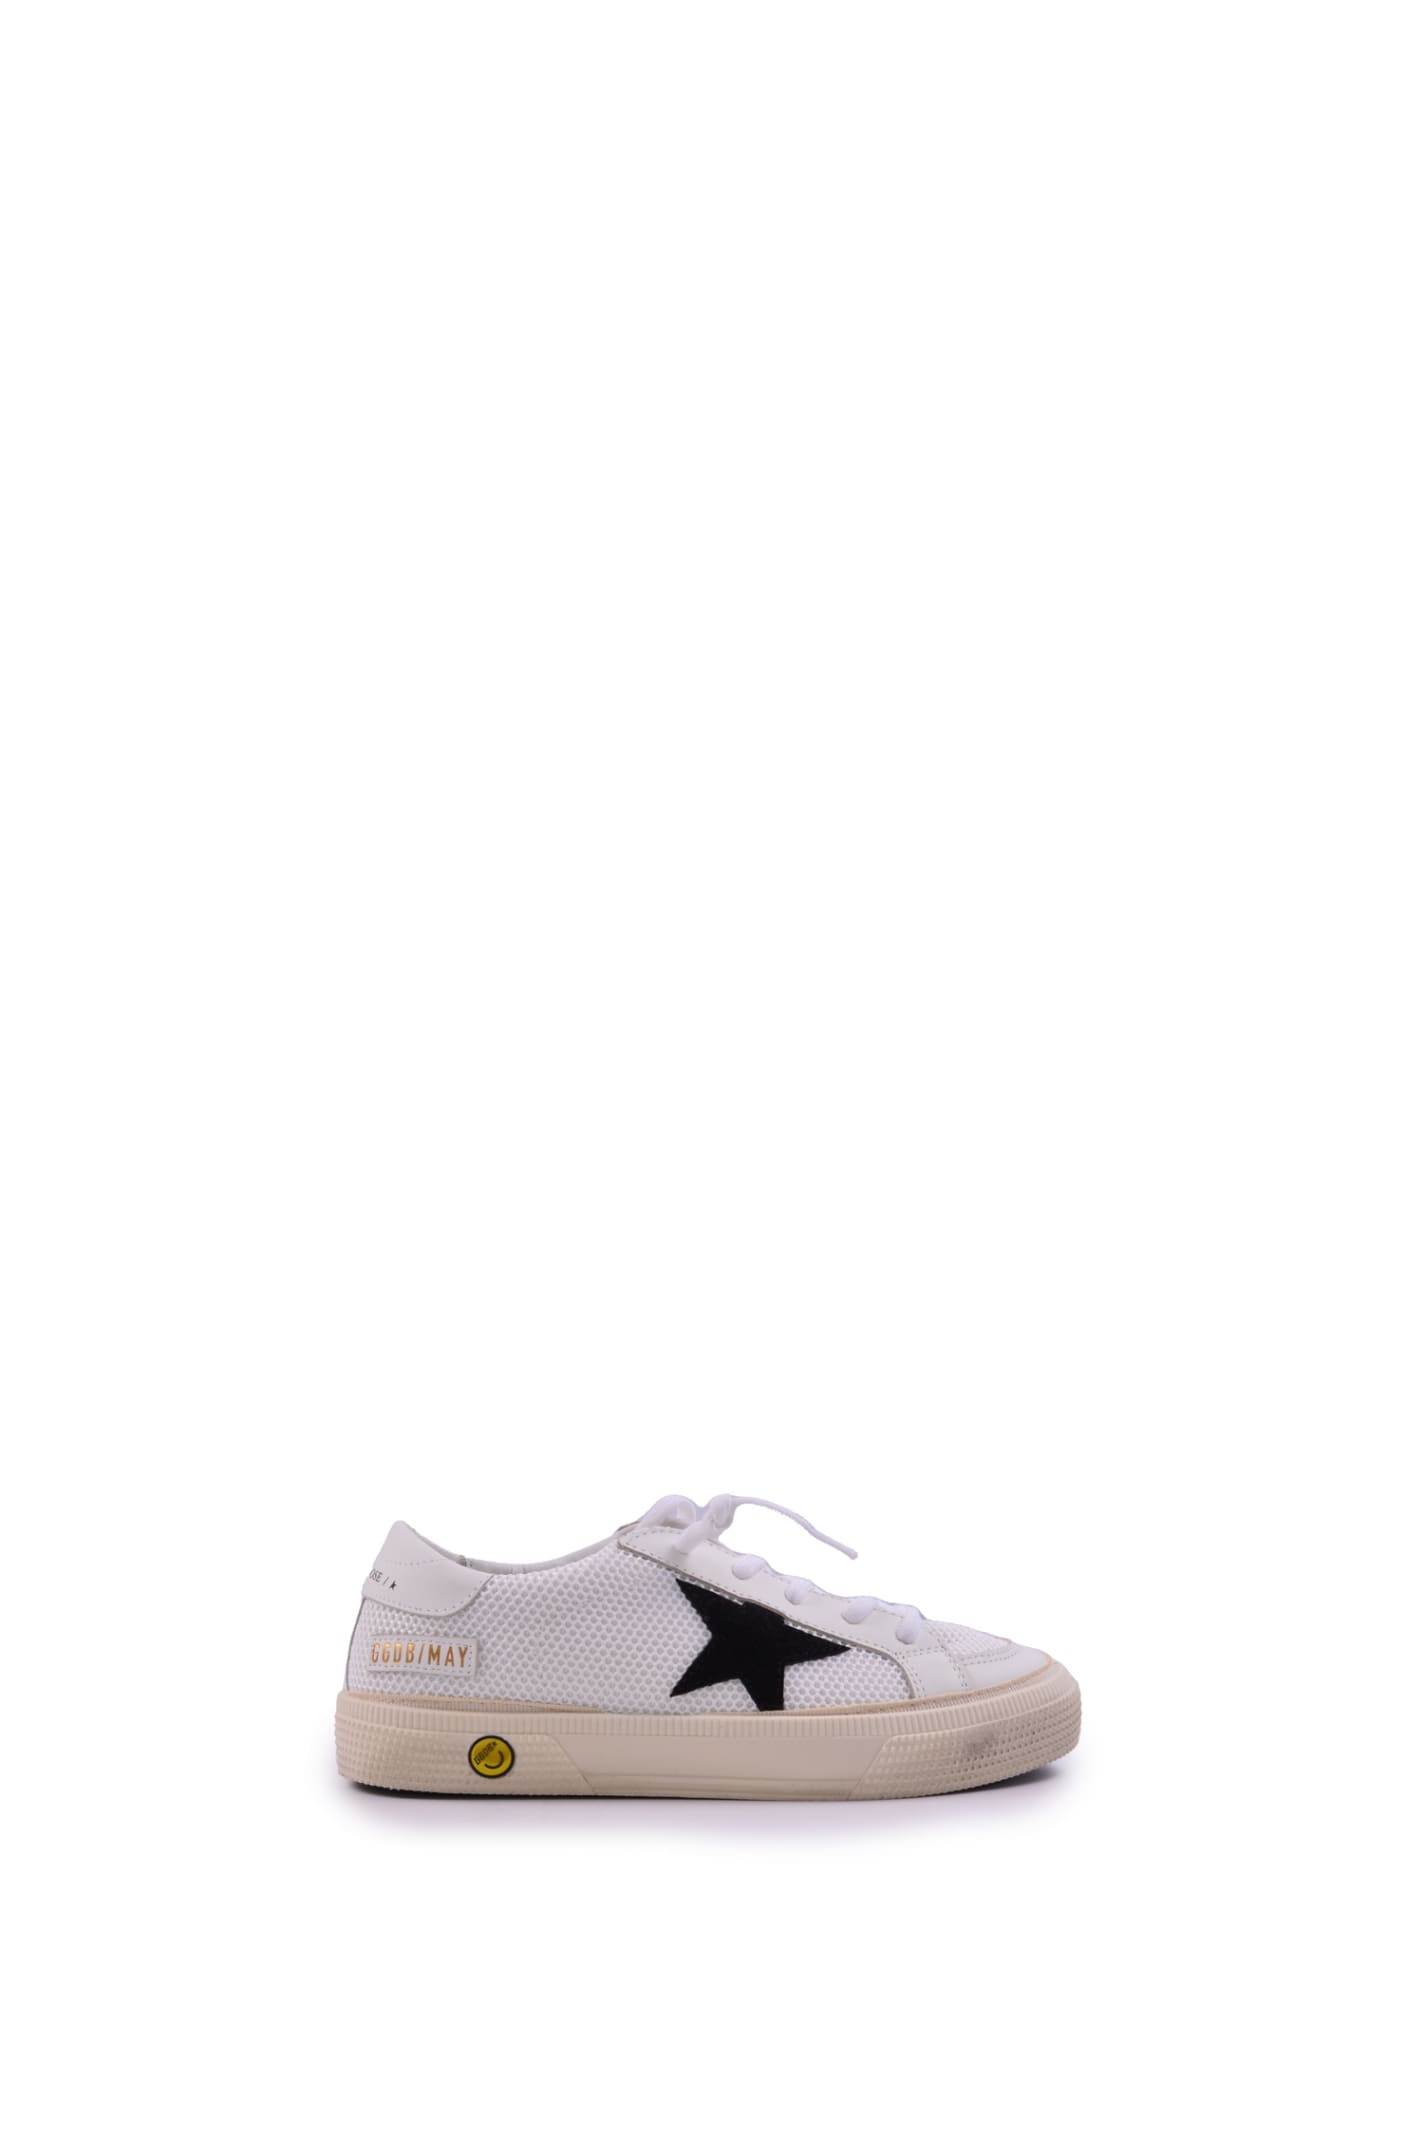 Golden Goose Leather Sneakers